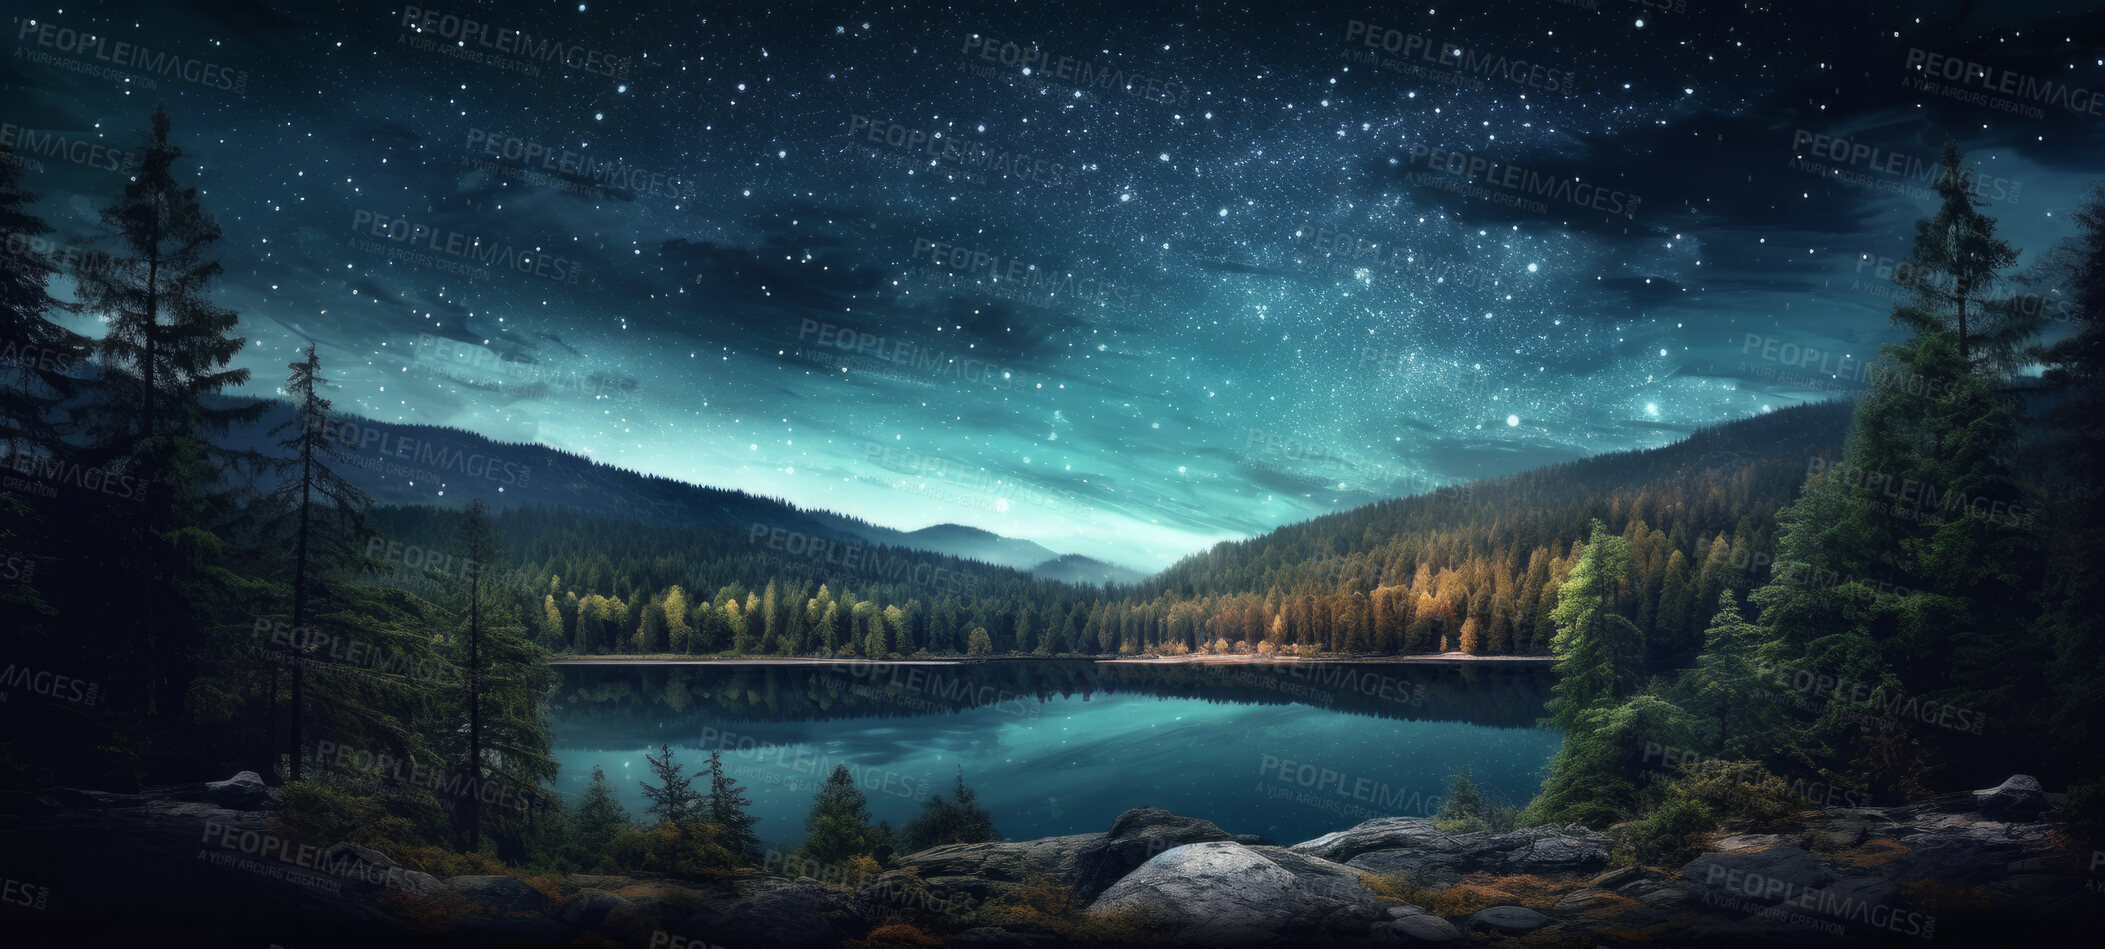 Buy stock photo Wide view or panorama of a starry sky seen from the forest or campsite